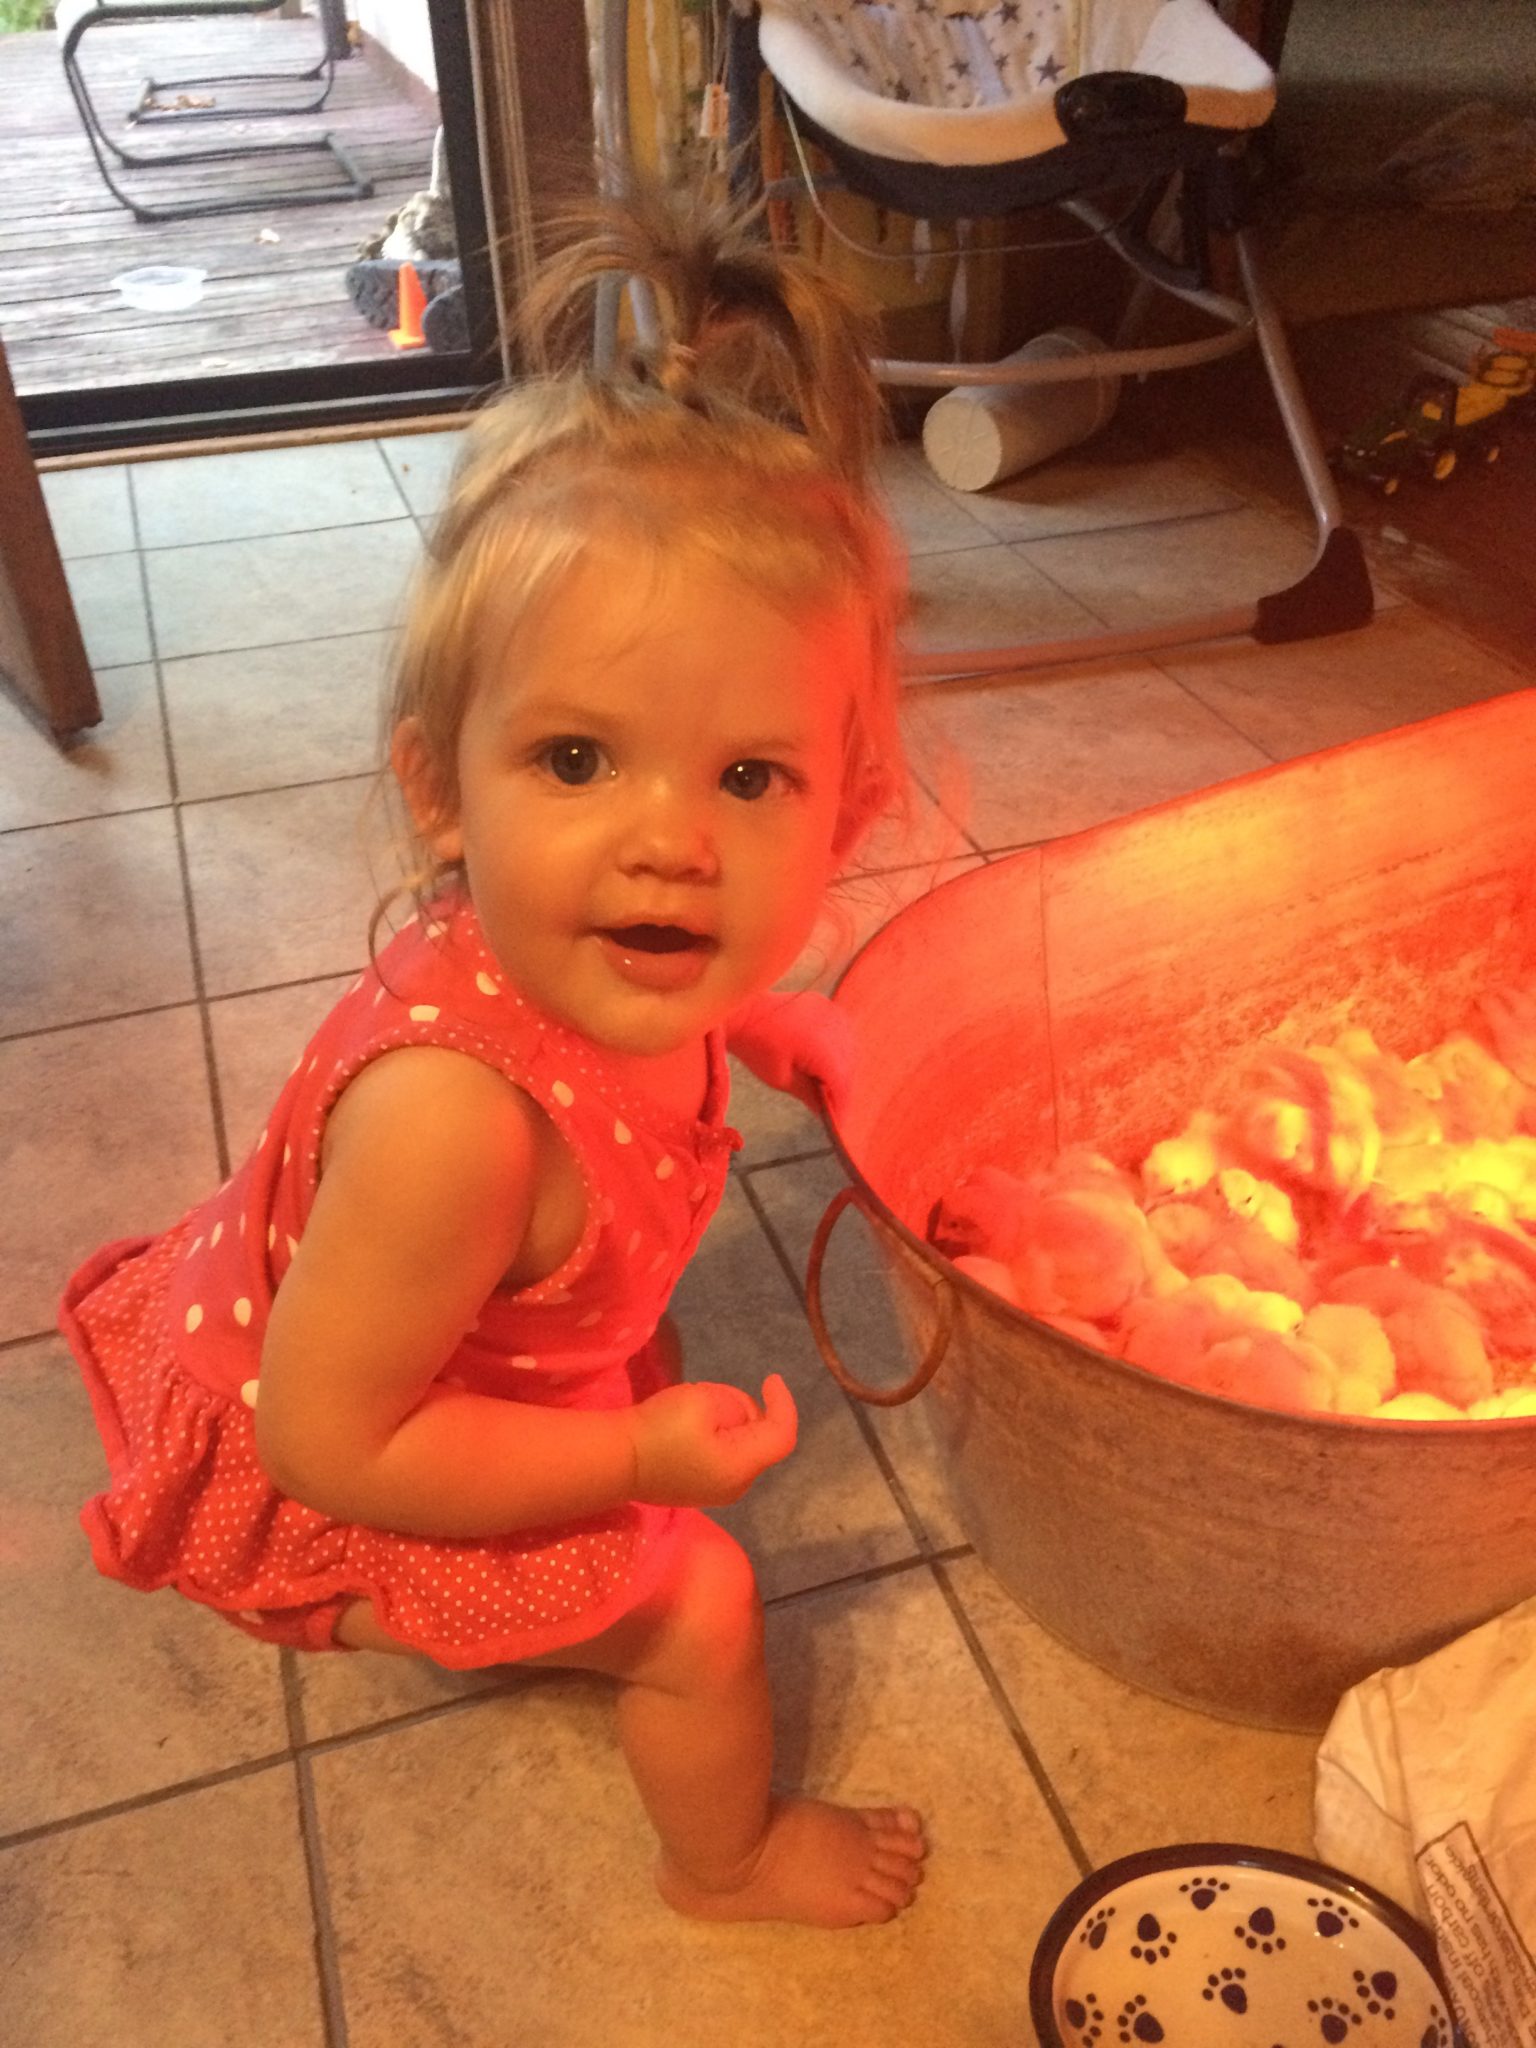 little girl about 2 years old looking at chicks under a heat lamp